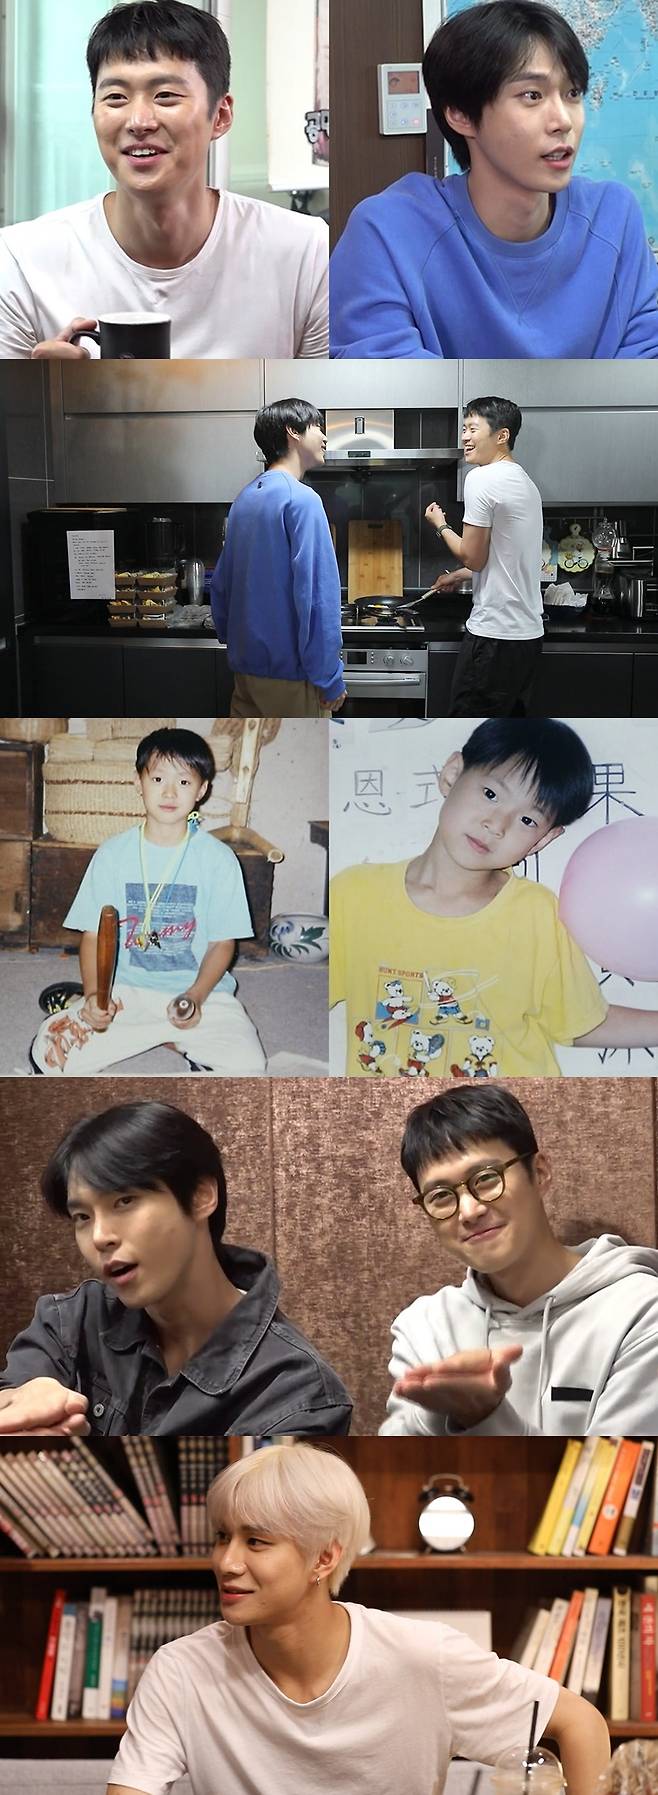 Actor Resonance, NCT member Doyoung emits his brother-in-law chemiMBC Point of Omniscient Interfere (planned by Park Jung-gyu / directed by Noshi Yong, Chae Hyun-seok / hereinafter Point of Omniscient Interfere) 169th broadcast on September 11th reveals the daily life of Resonance and Doyoungs tit-for-tat brother chemistry explosion.On this day, Resonance reveals his brother, NCT Doyoung, and his real brother.Doyoung throws a cute stone fastball to Resonance, which is awkward in front of the camera, Do what you did ~ ~ and laughs with a realistic brother Kimi.In particular, Resonance can not stop laughing at Doyoungs sincere appearance in Point of Omniscient Interfere more than anyone else.Doyoungs bread bursts into his mouth, and Resonance was embarrassed by sweating.On top of my brother, who is running like watching Tom and Jerry, I saw that my brother s appearance devastated the studio with laughter.Doyoung then makes a bag stew with skillful skill, and it also shows off a special dish from SNS to surprise Resonance.I wonder what the special menu of Doyoung, which Resonance was surprised at, was.